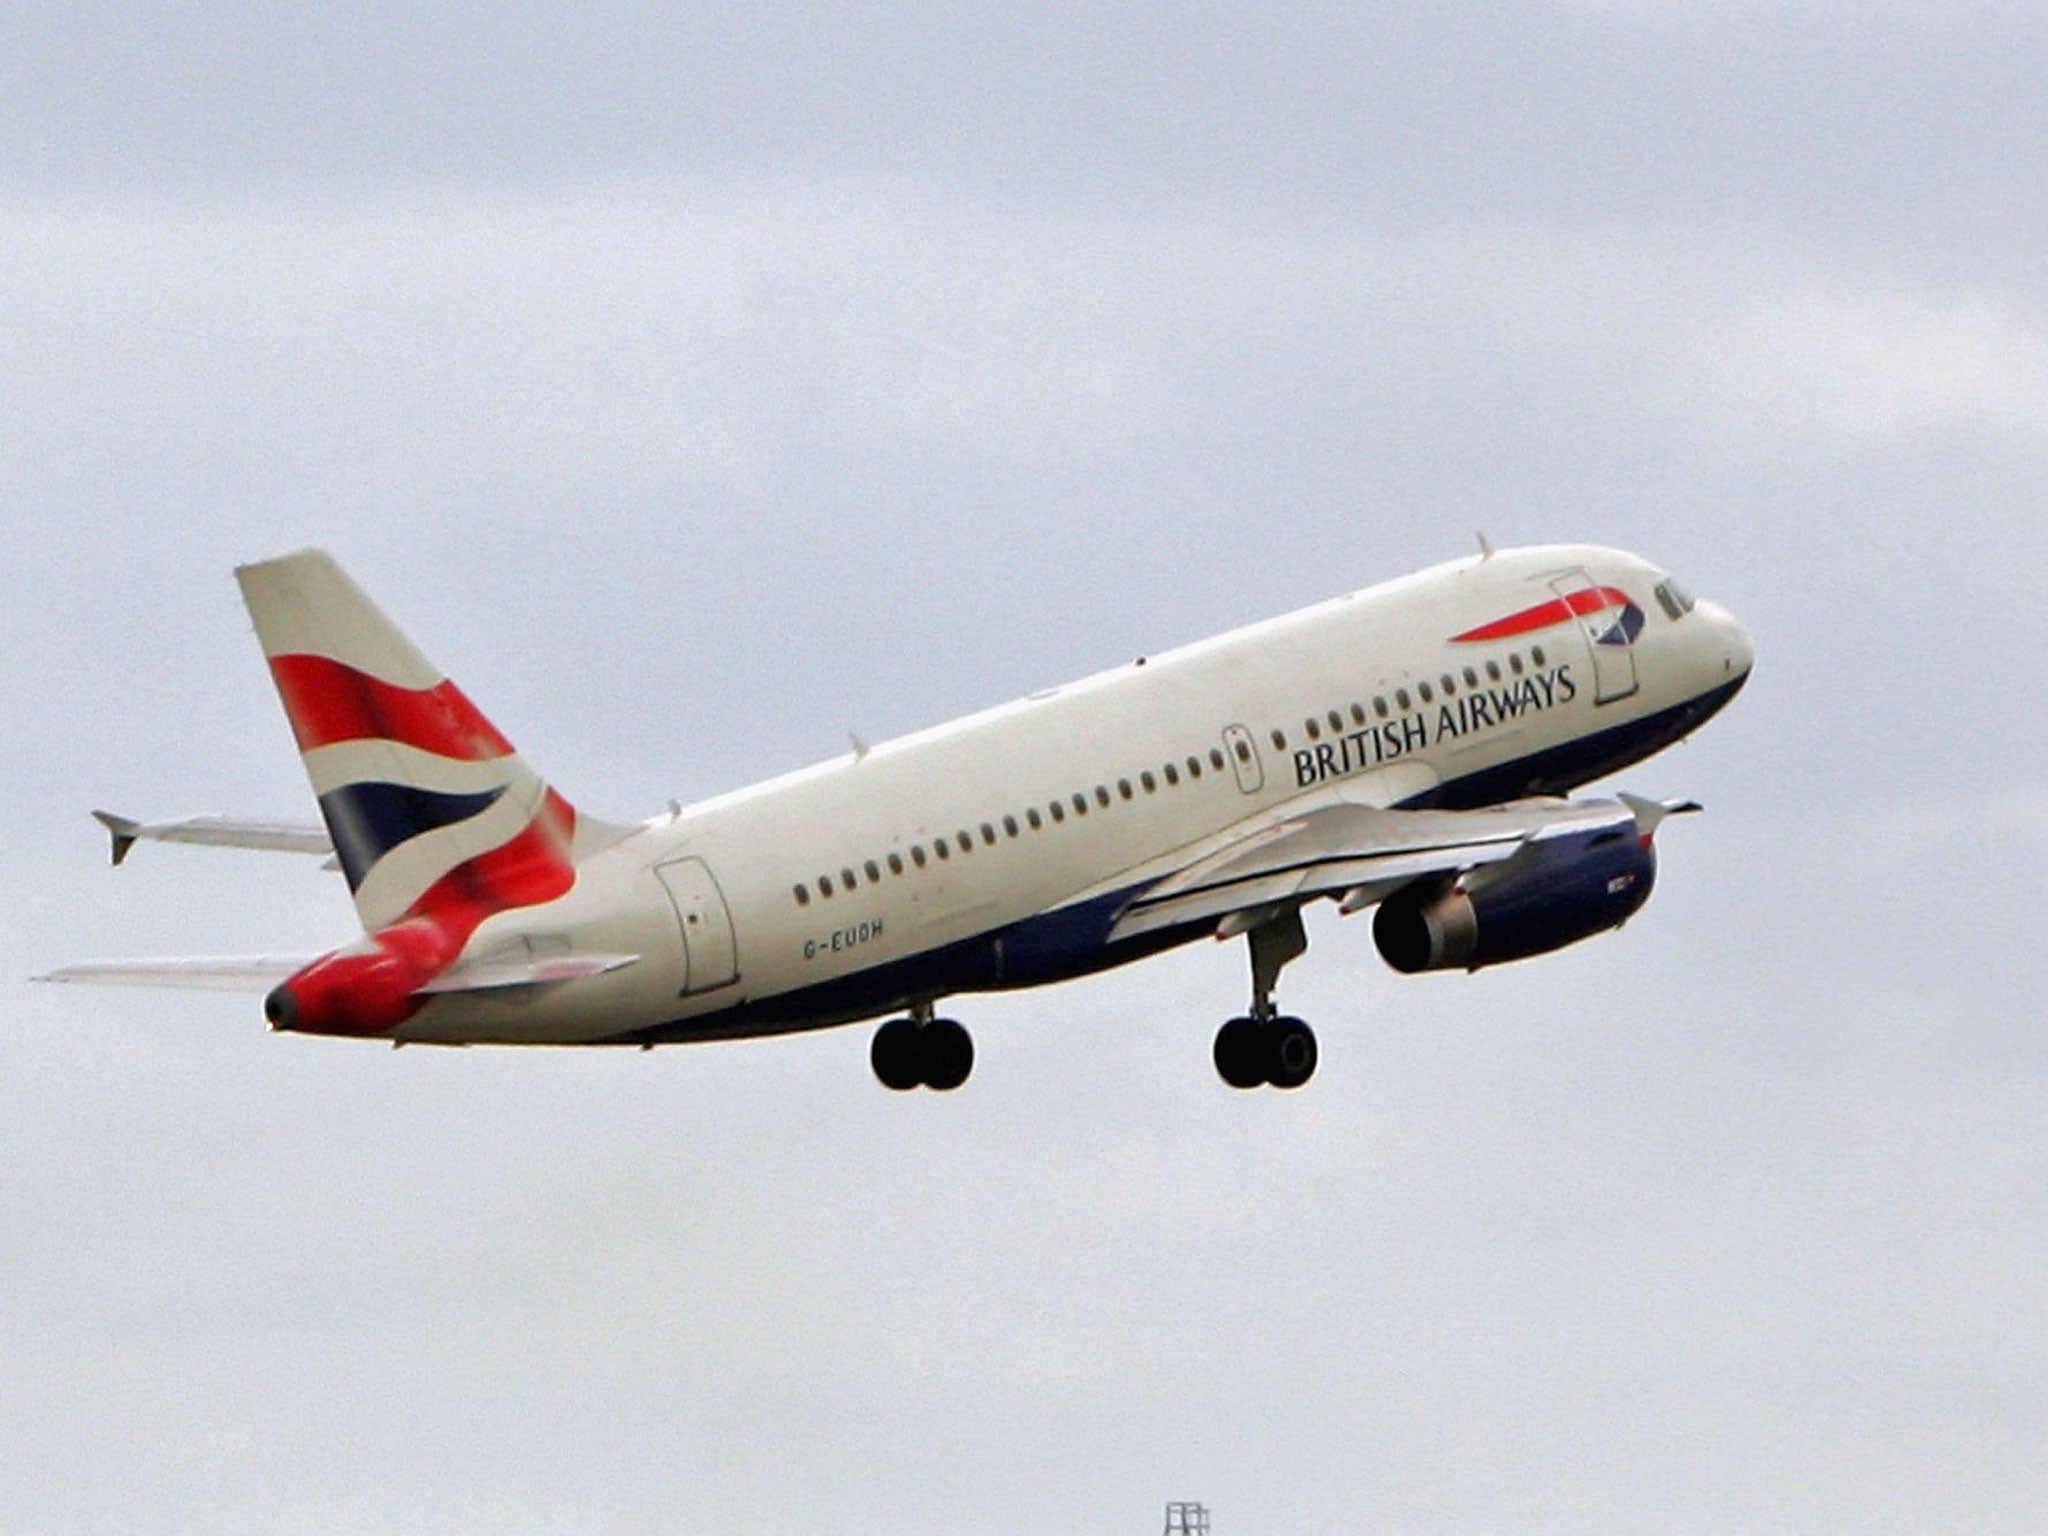 https://static.independent.co.uk/s3fs-public/thumbnails/image/2013/08/25/19/British-Airways-Getty.jpg